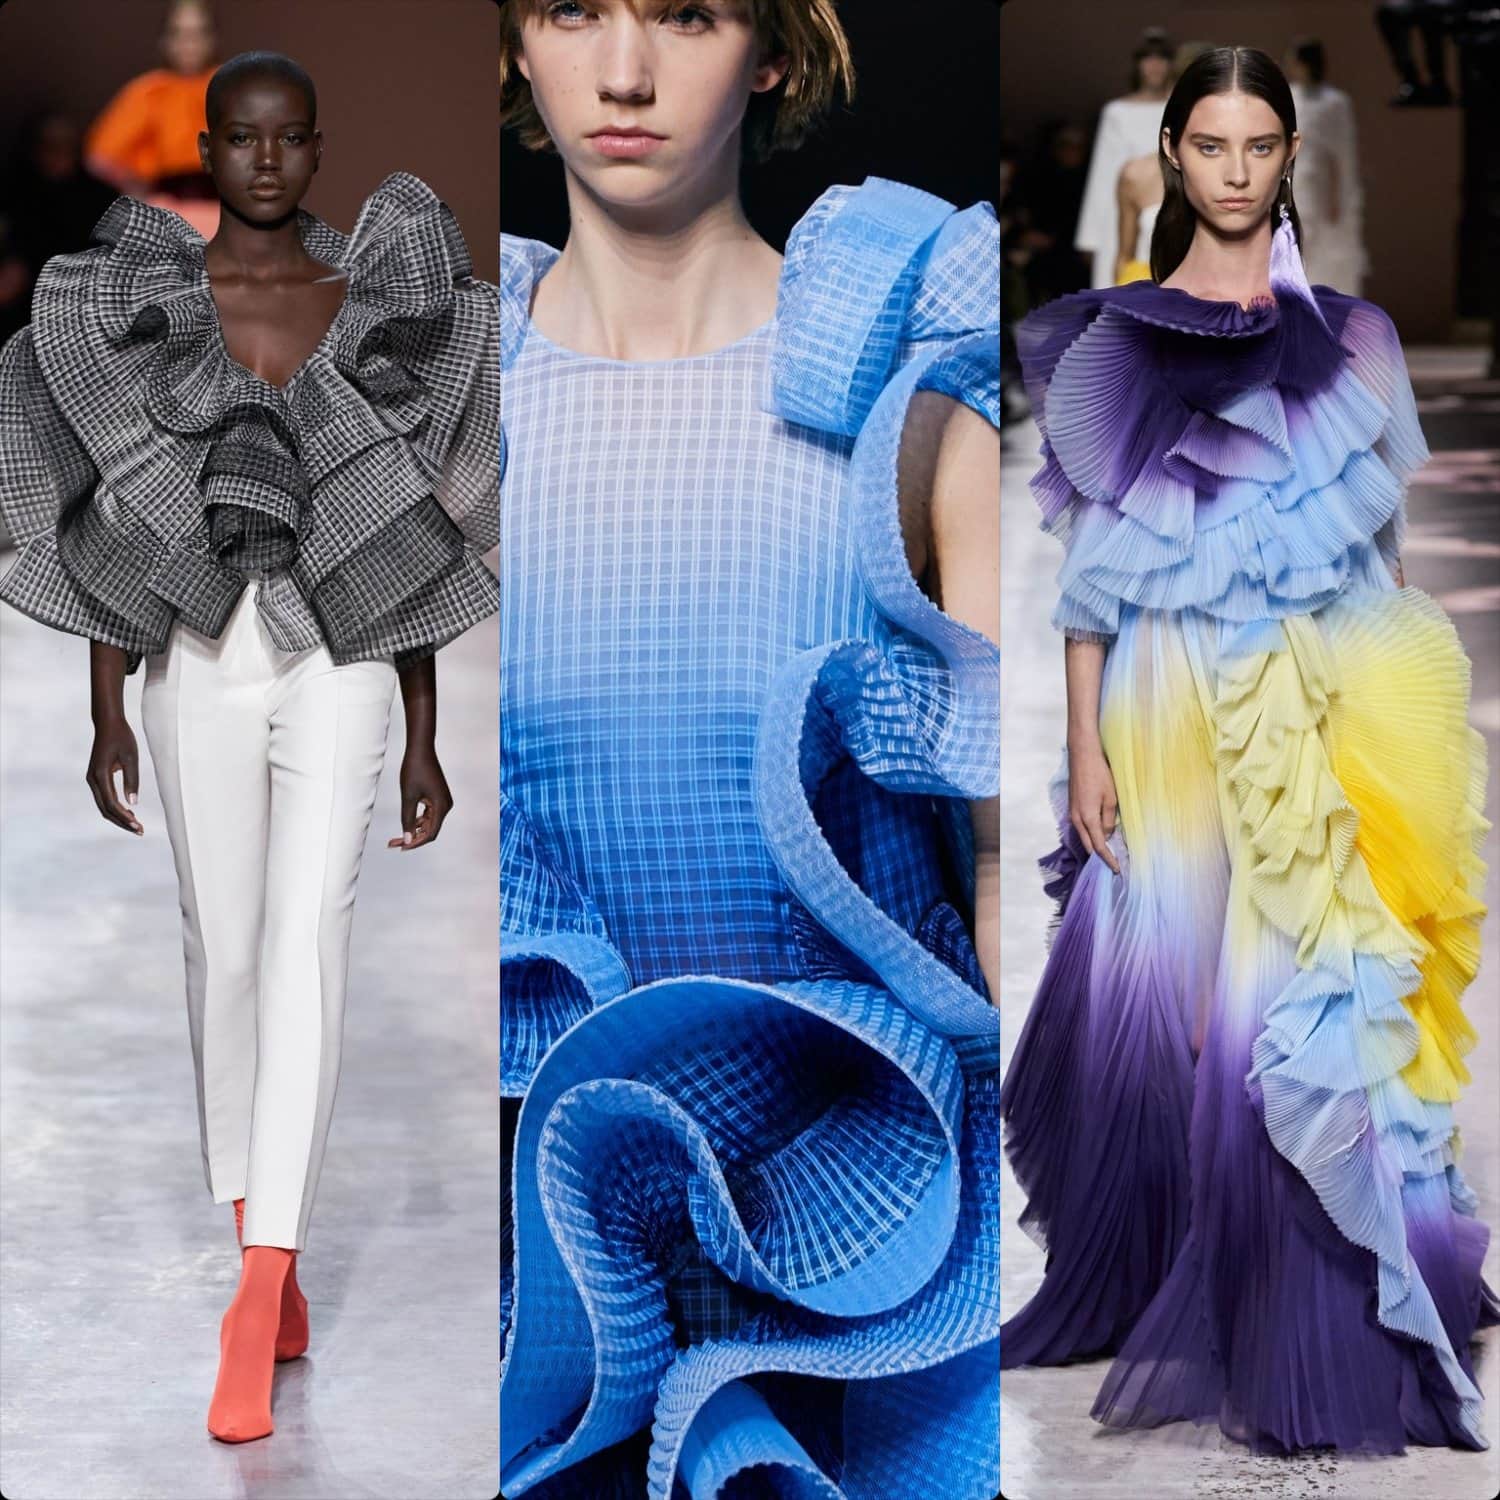 Givenchy Haute Couture Spring Summer 2020 Paris. RUNWAY MAGAZINE ® Collections. RUNWAY NOW / RUNWAY NEW